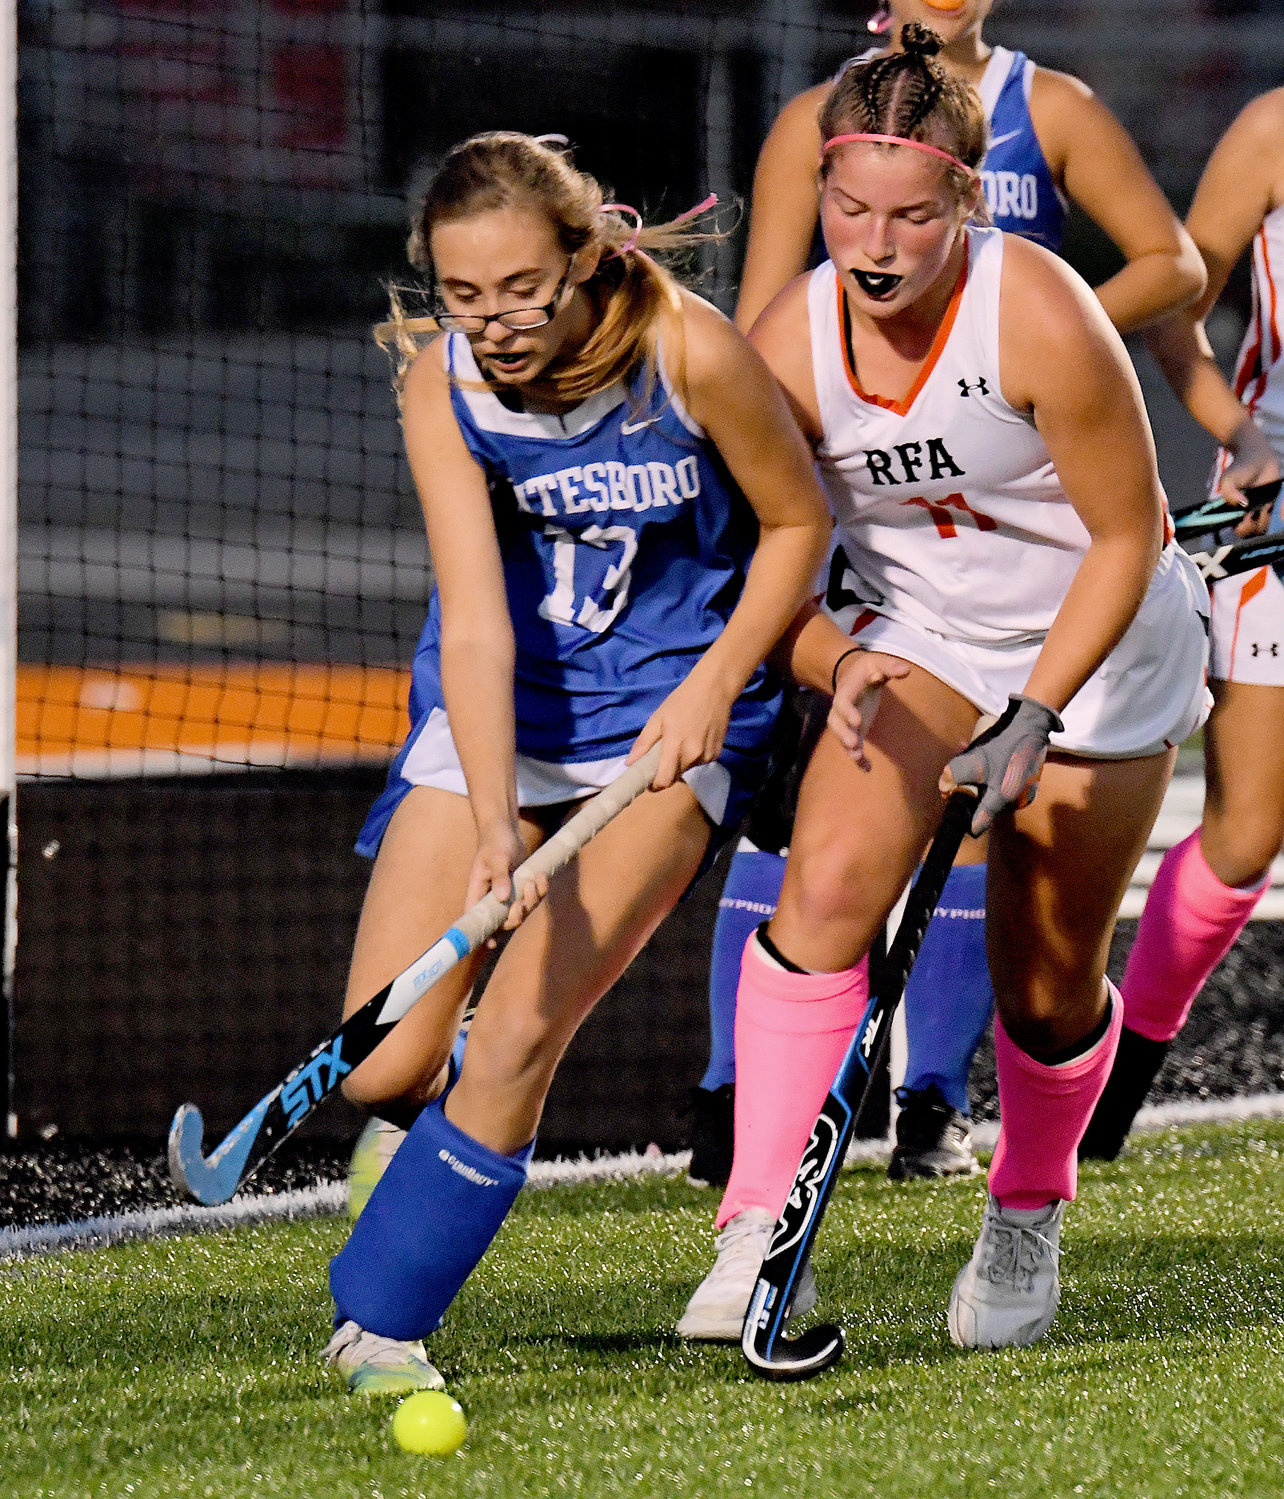 Avery Davis of Whitesboro tries to clear the ball from the Blue Devils' goal with Rome Free Academy's Hannah Lowder looking to get the ball back in the first half at RFA Stadium Wednesday night. RFA won 8-0 and Lowder scored once.